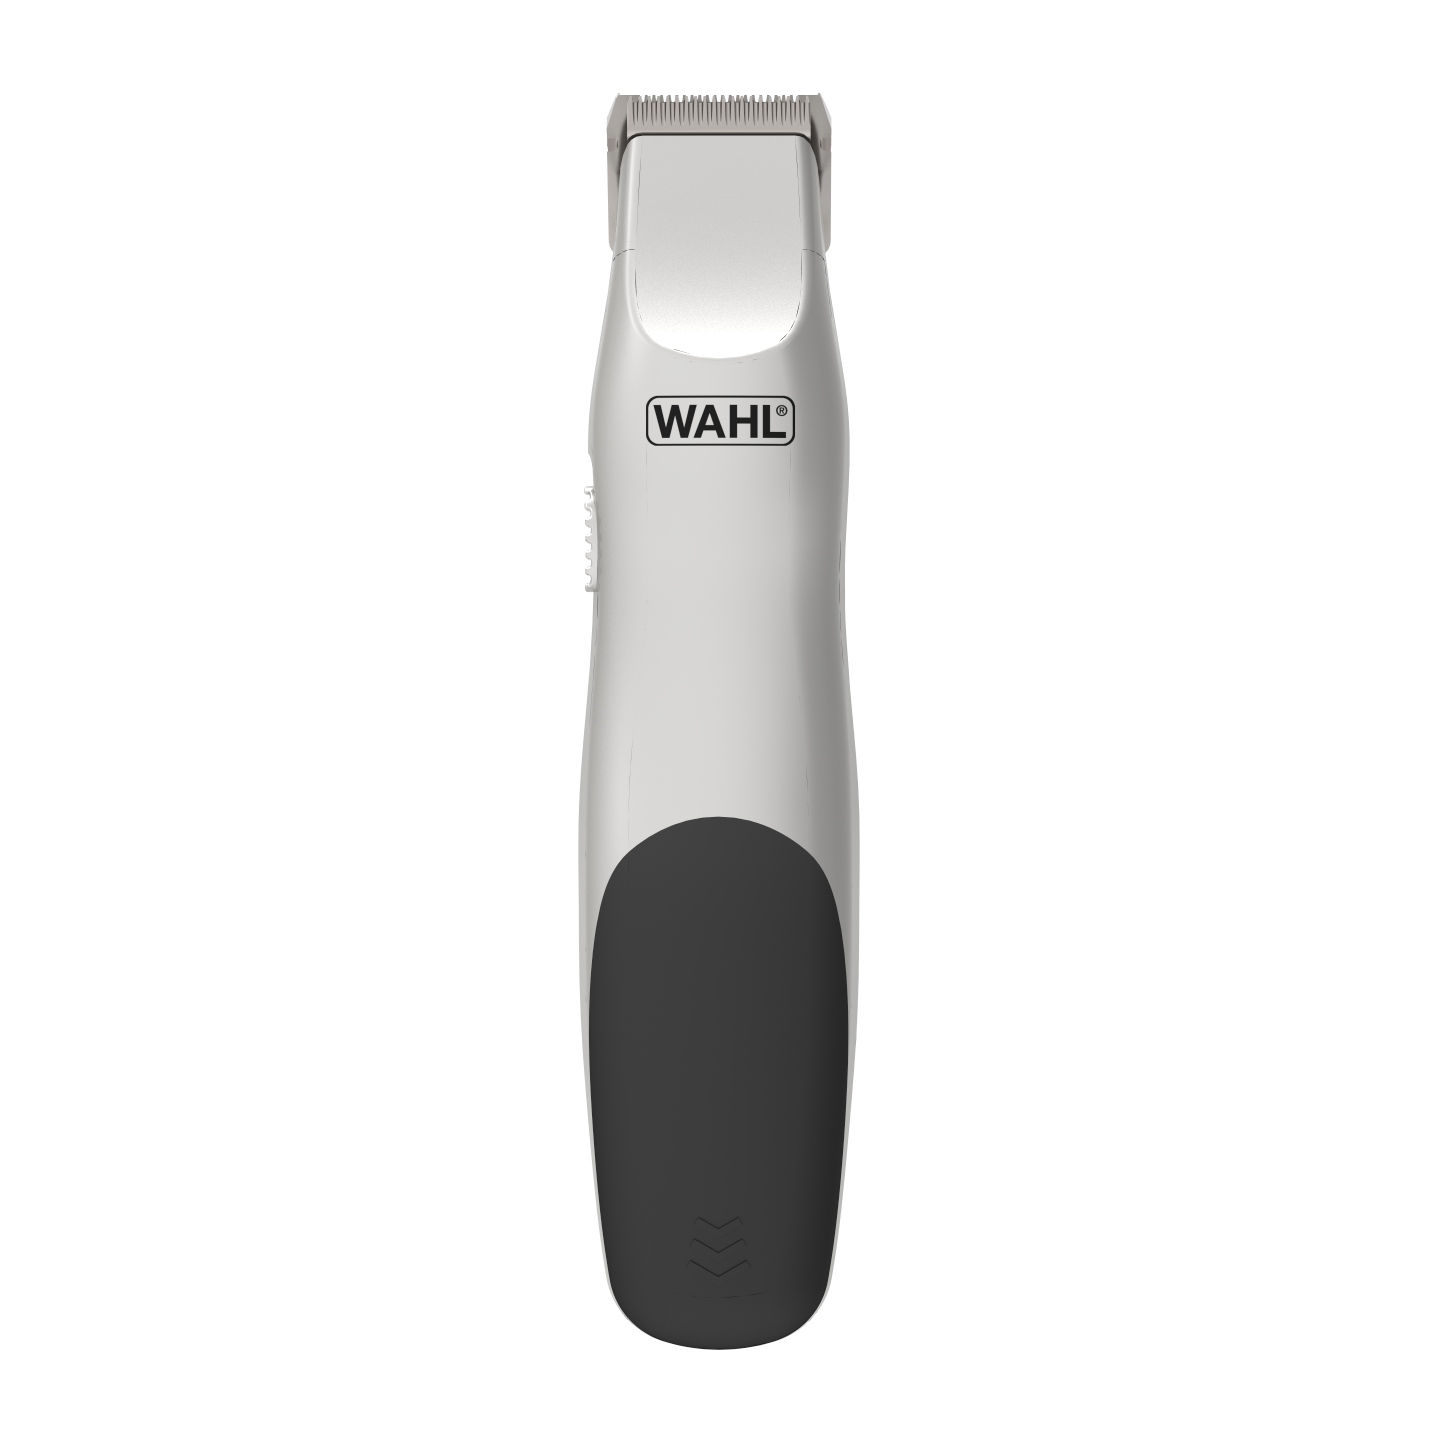 wahl hair trimmers uk